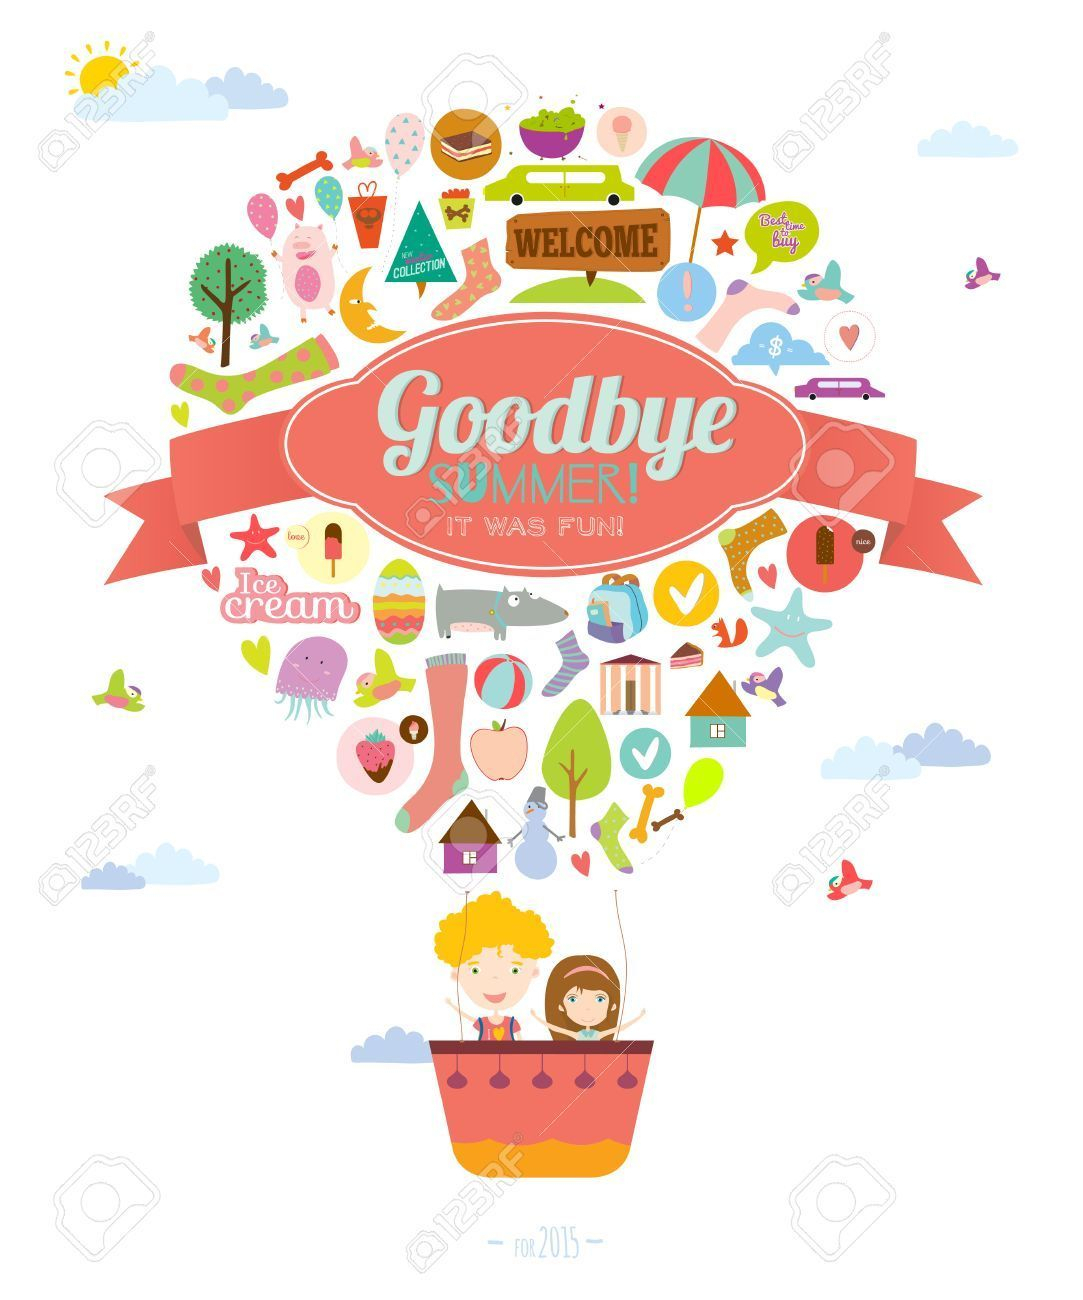 Top Printable Good Bye Cards | Graham Website Throughout Goodbye Card Template